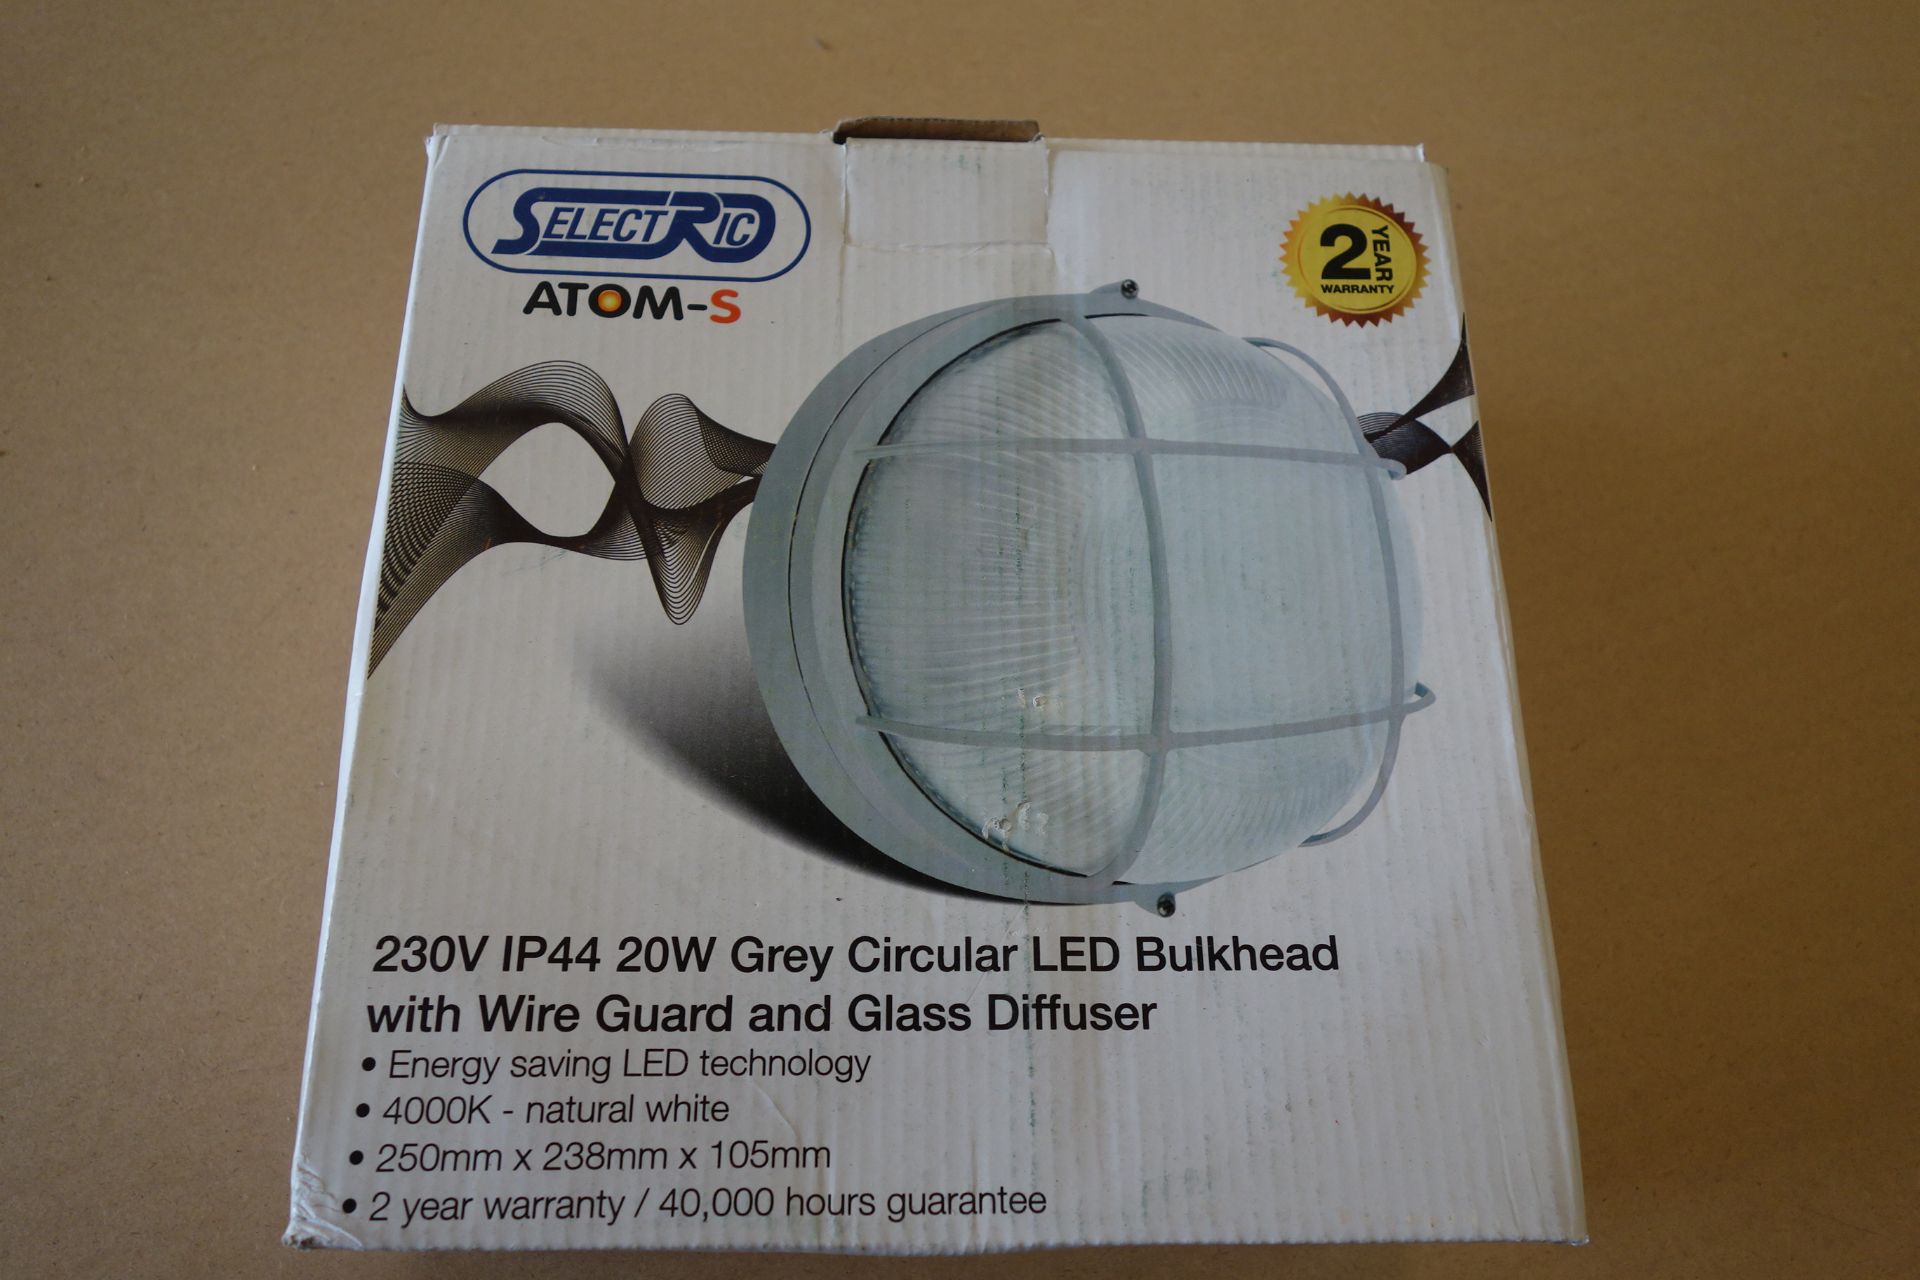 20 X Select ATOM-S-1 20W LED Grey Circular Led Bulkhead With Wire Guard + Glass Deffuser 4000K 250MM